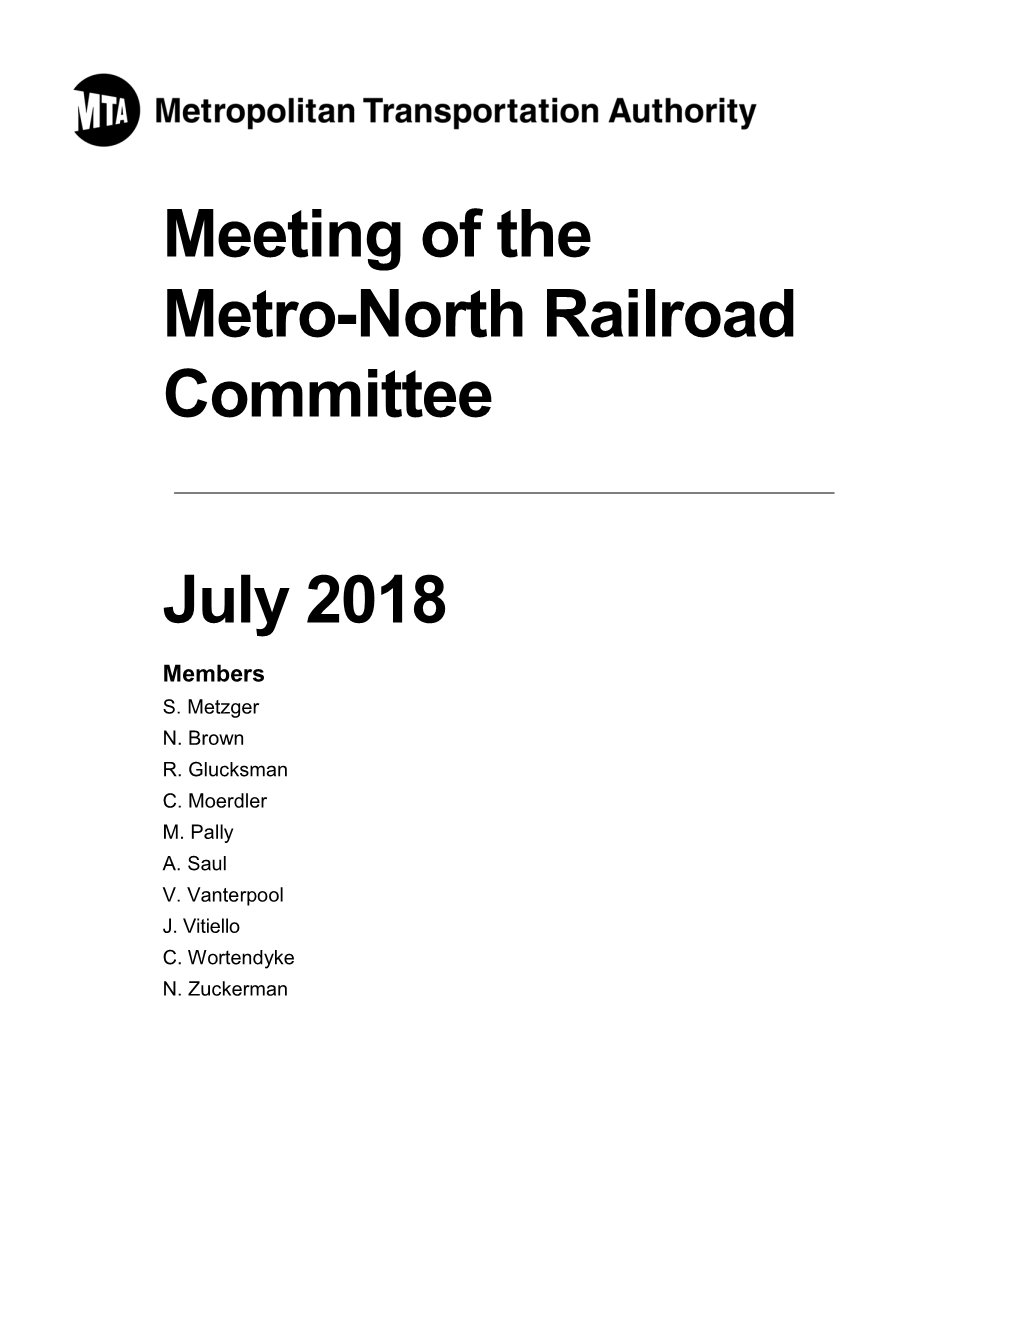 Meeting of the Metro-North Railroad Committee July 2018